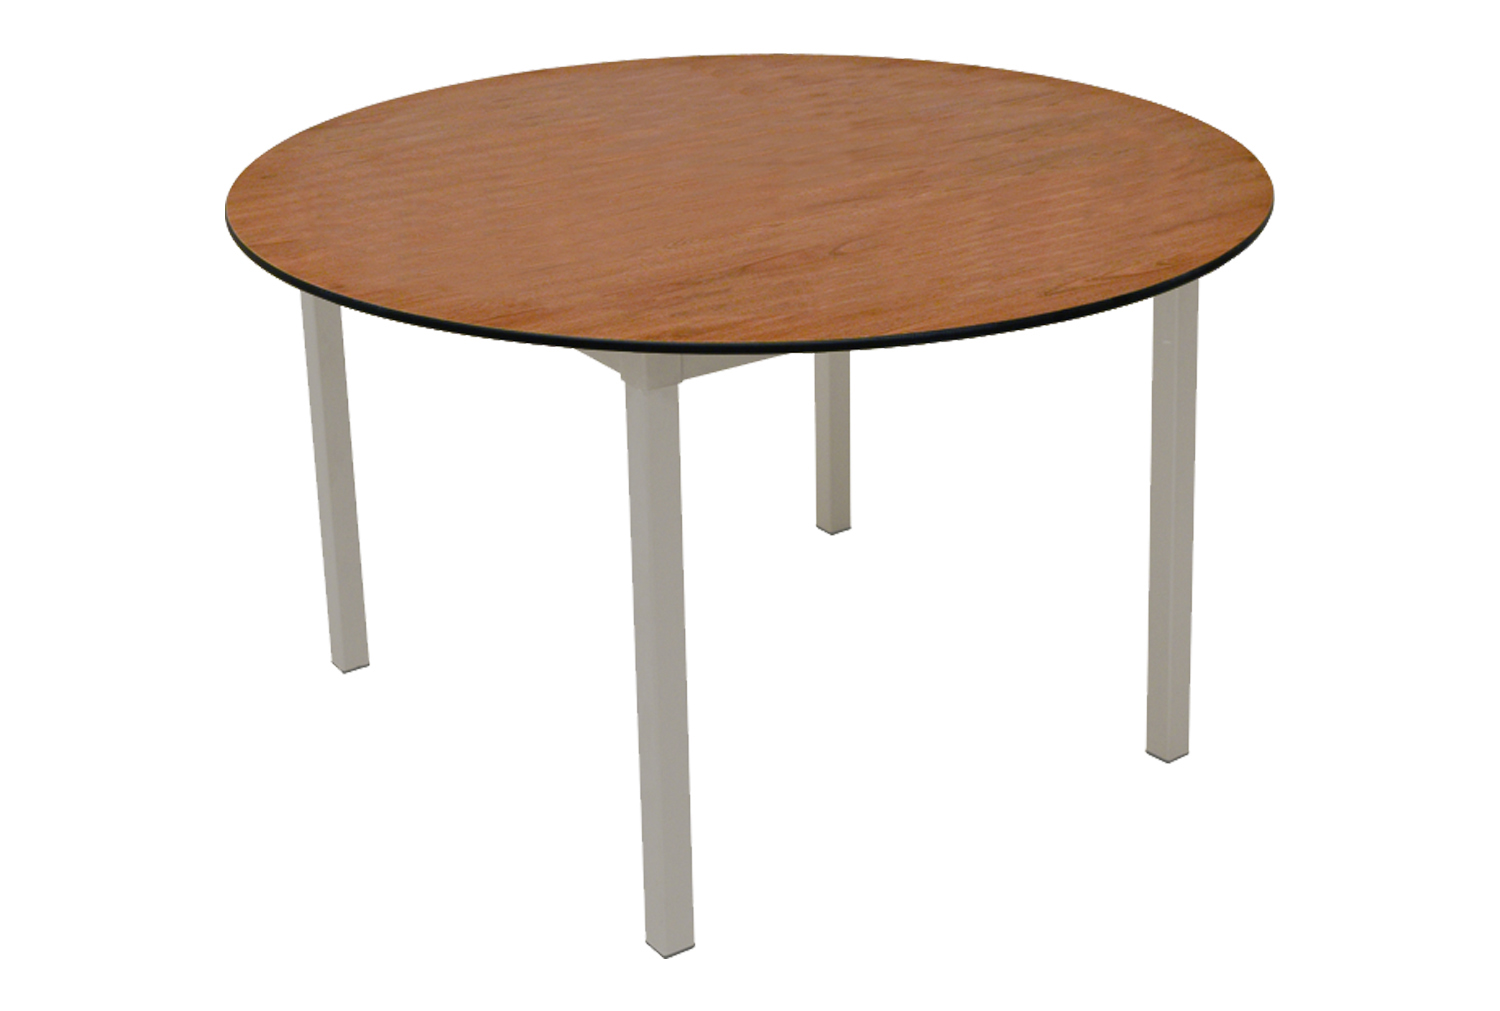 Gopak Enviro Compact Outdoor Round Classroom Table With Solid Top, 120dia (cm), Chestnut